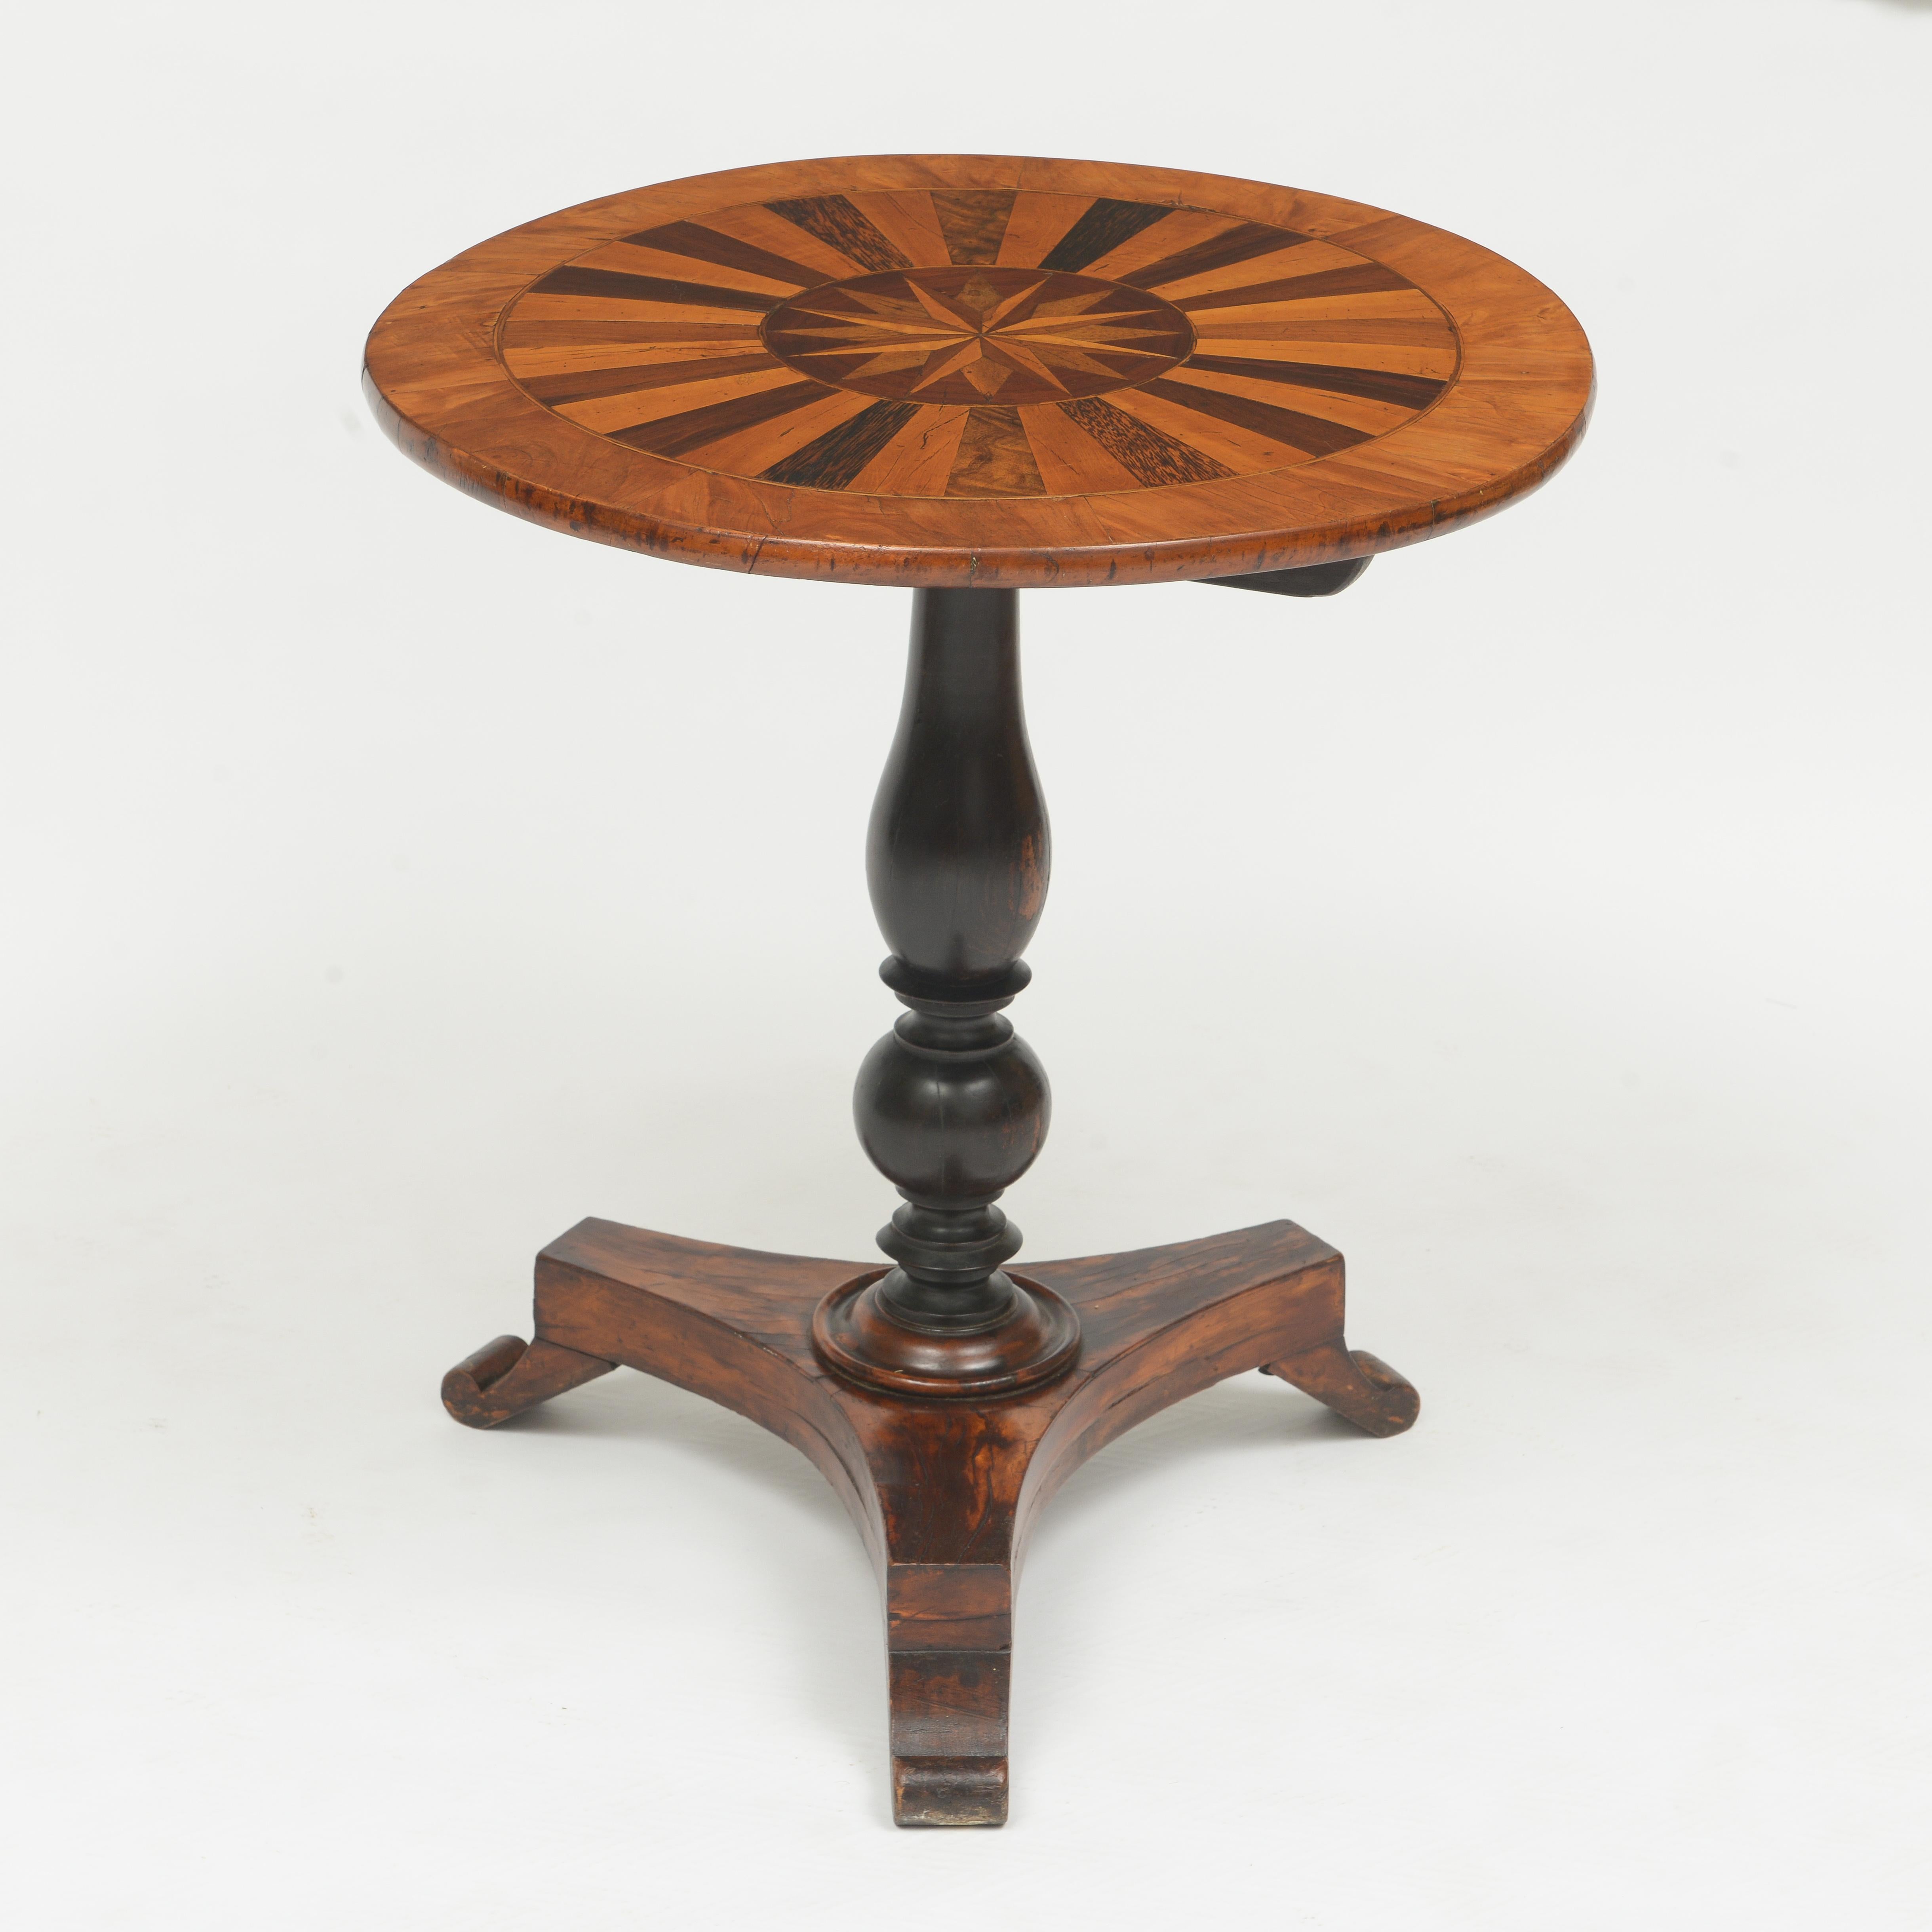 Sample wood top in a star pattern, solid ebony pedestal base with three legs, great color with appropriate patina.

